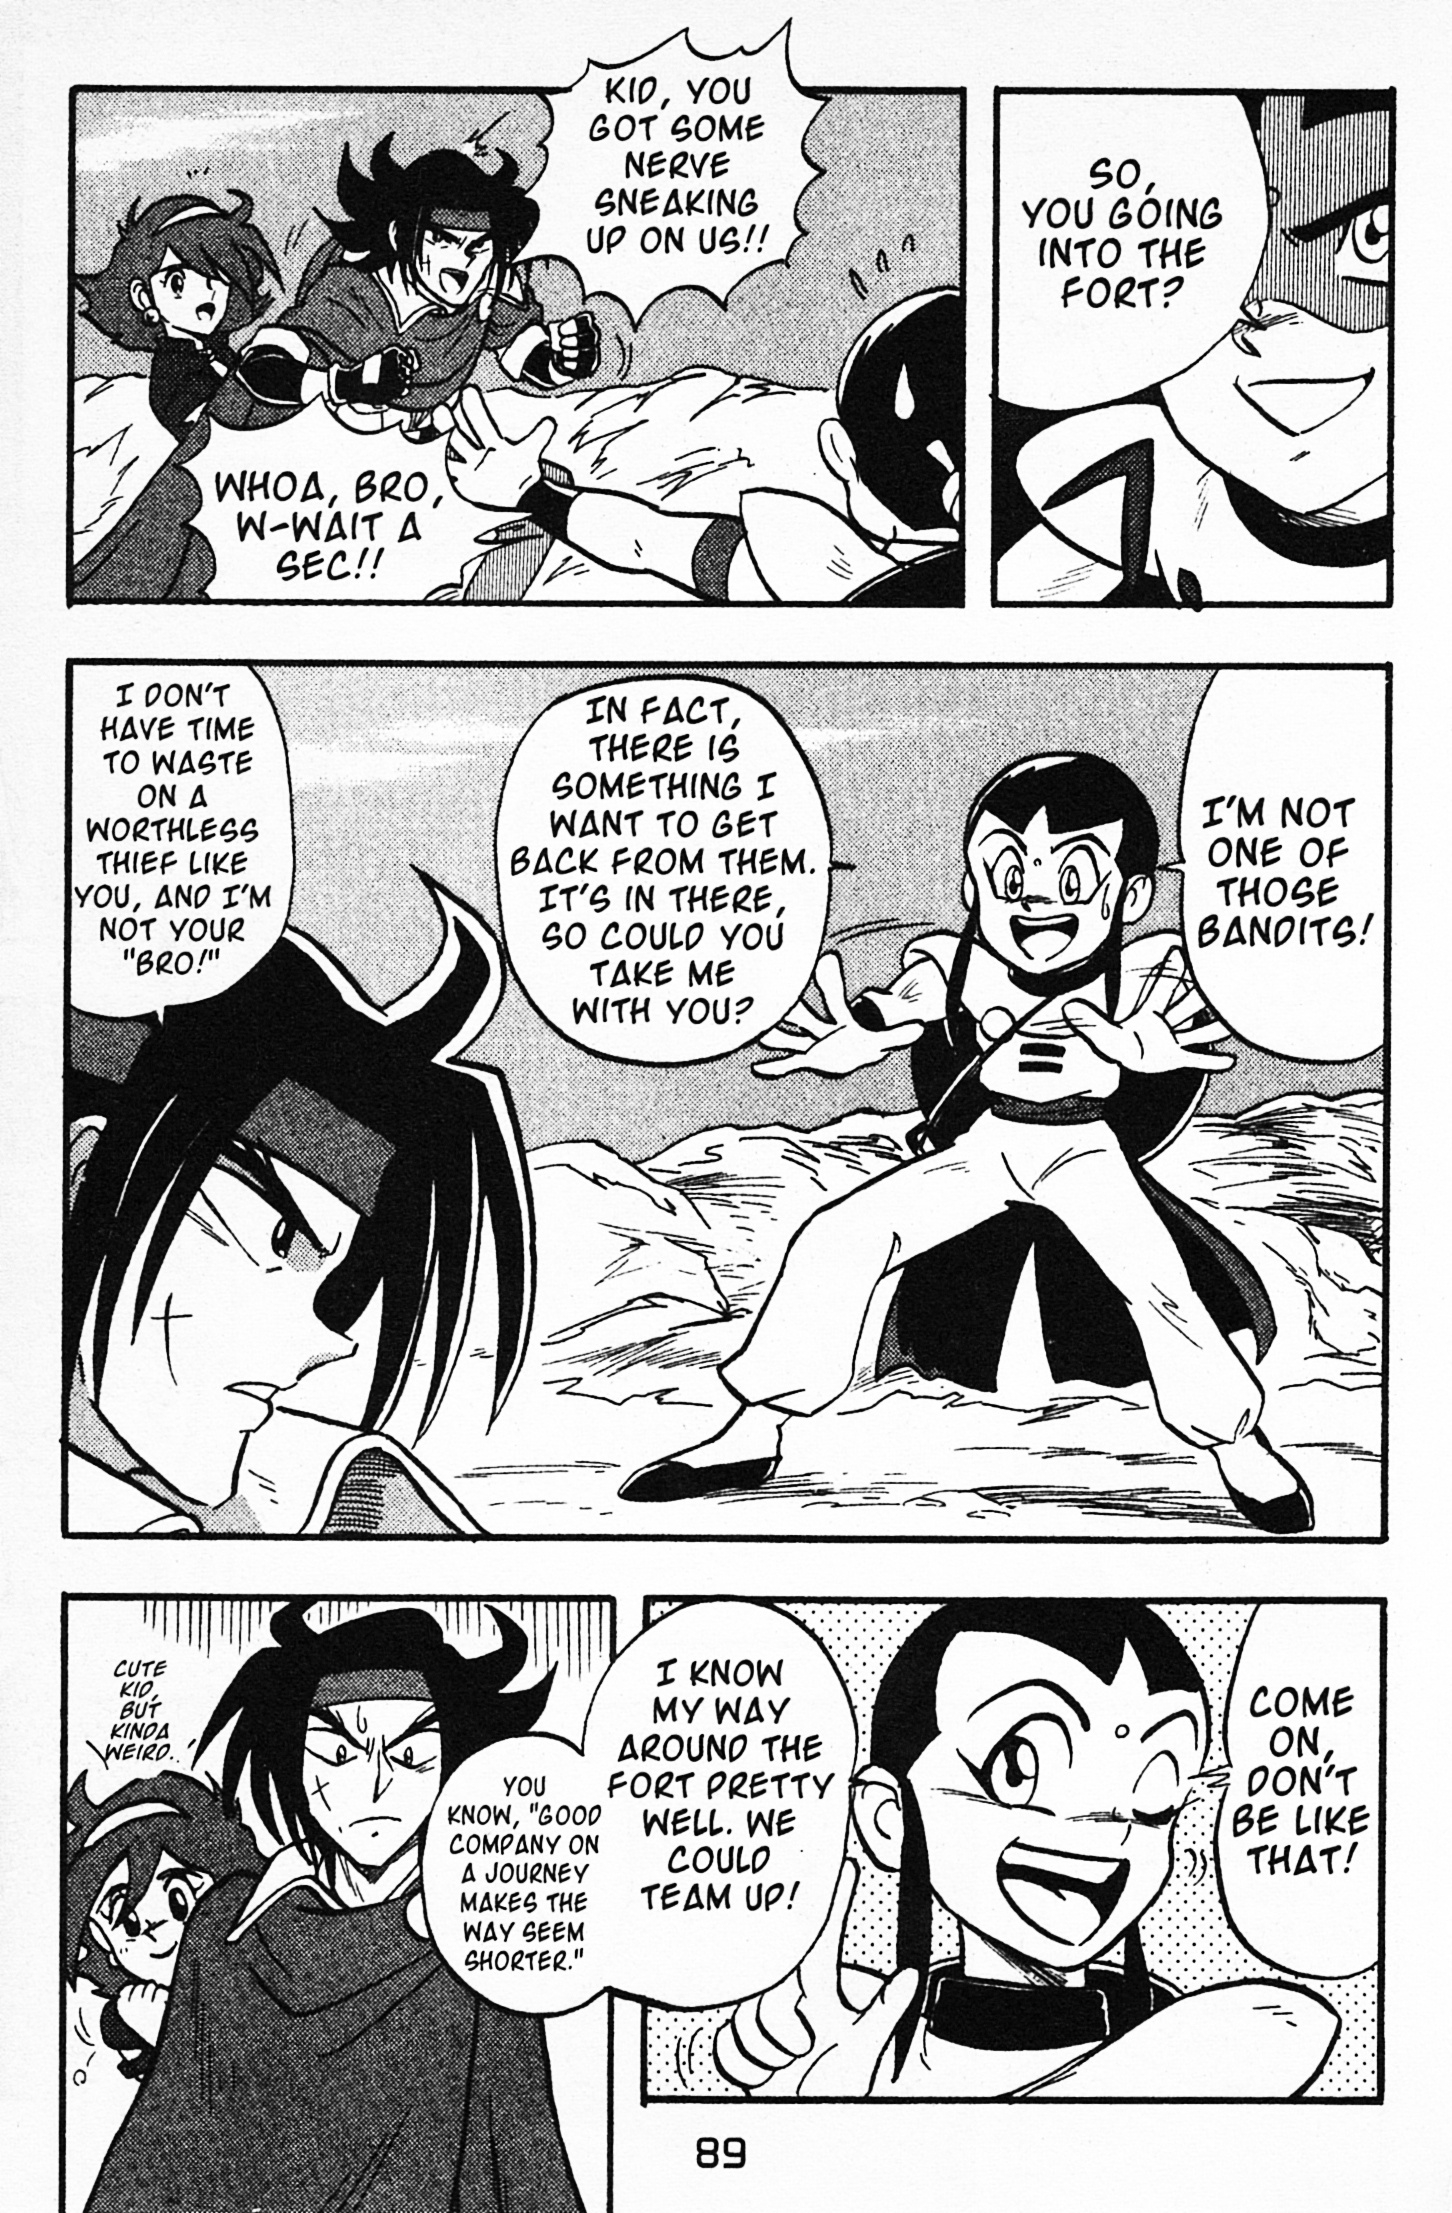 Mobile Fighter G Gundam - Page 3